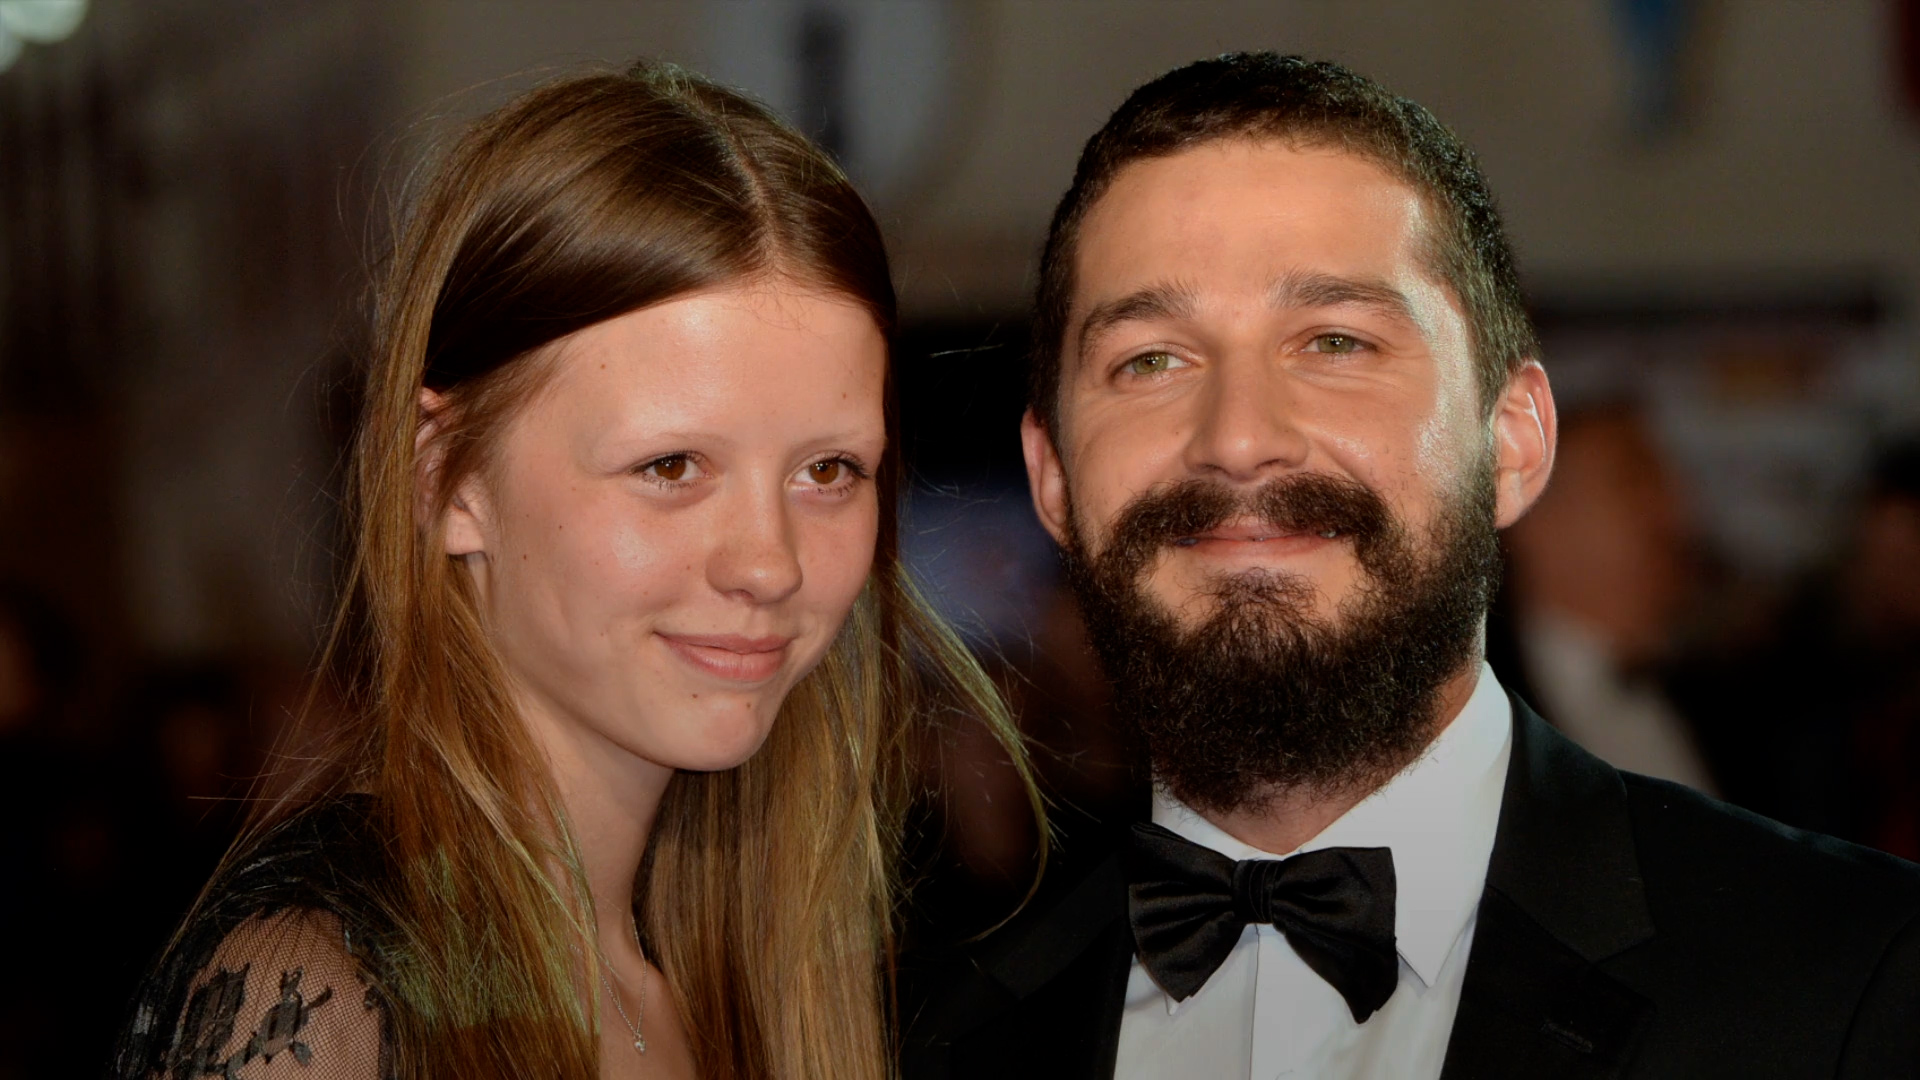 Shia LaBeouf and Mia Goth reportedly expecting first child